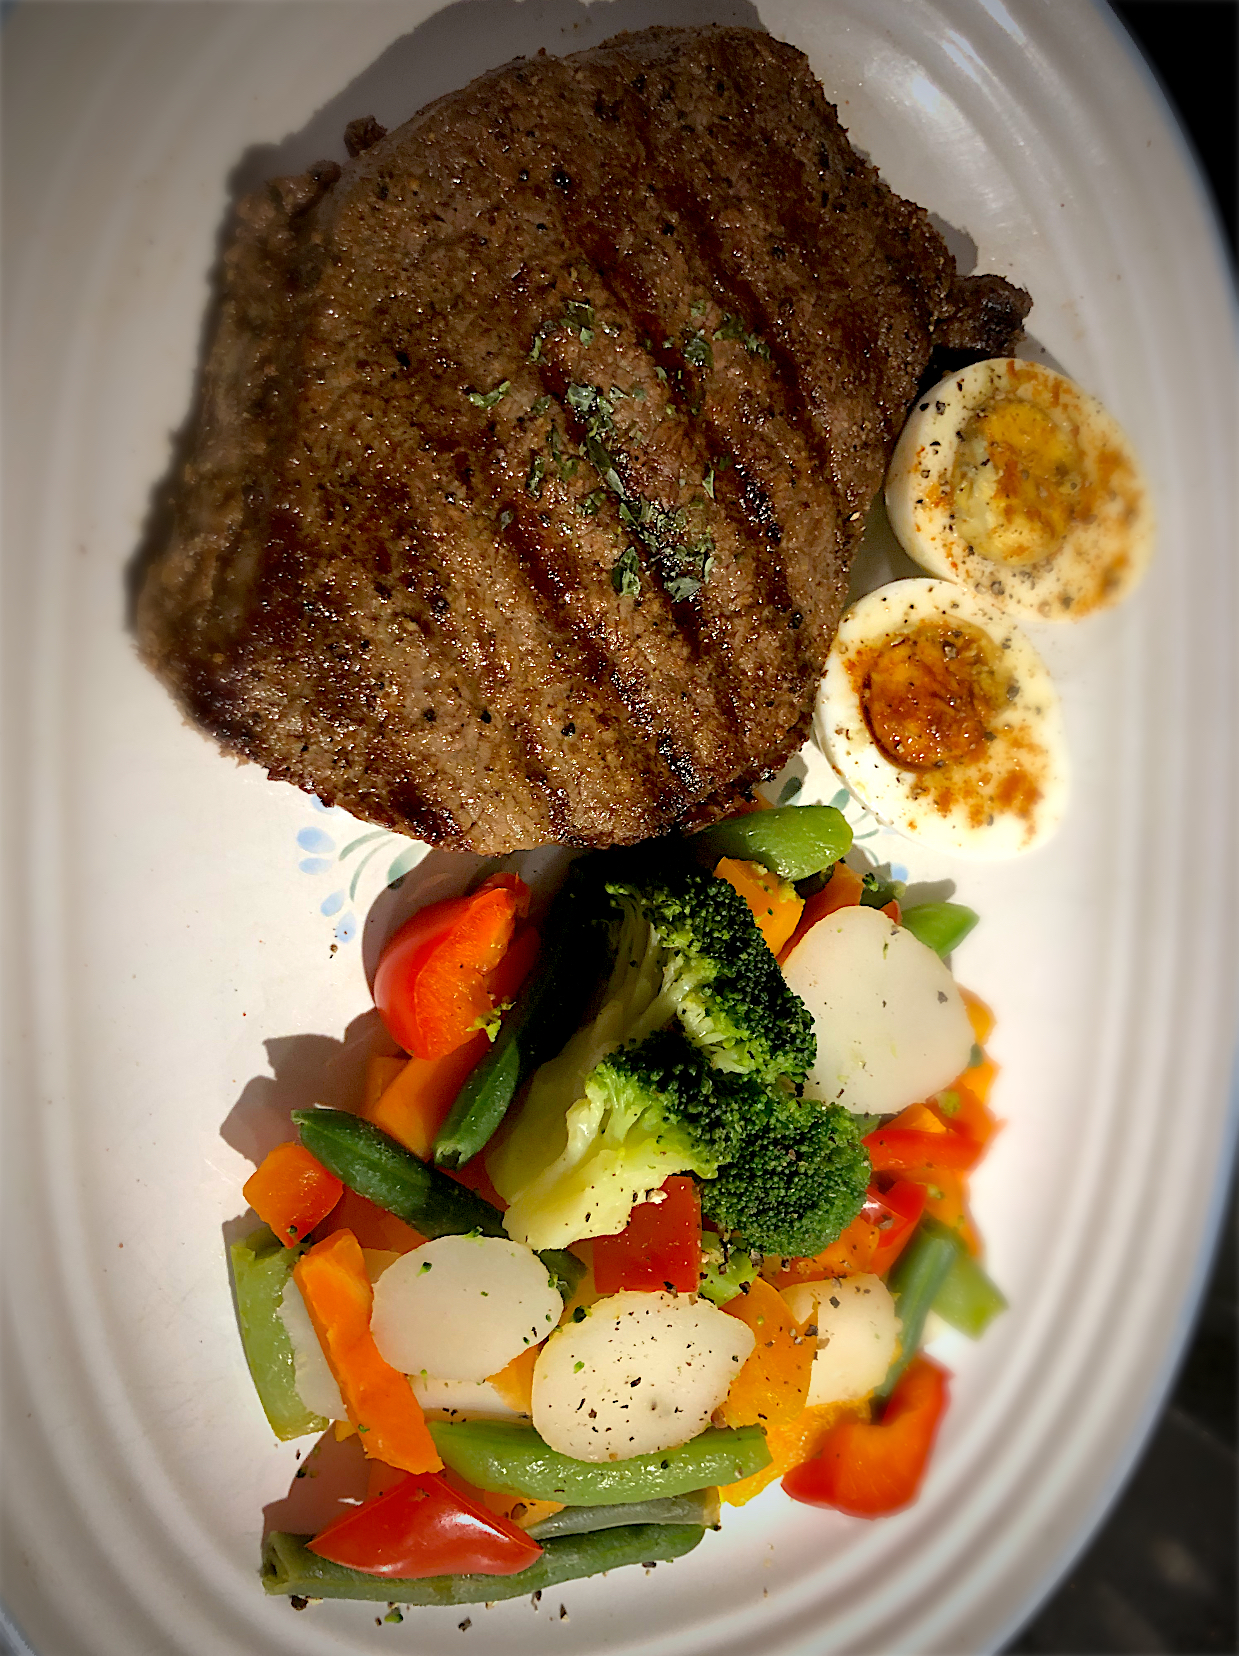 BentoFox's dish Keg Montreal steak seasoned steak, with a side of mixed vegetables and a pickled egg topped with paprika